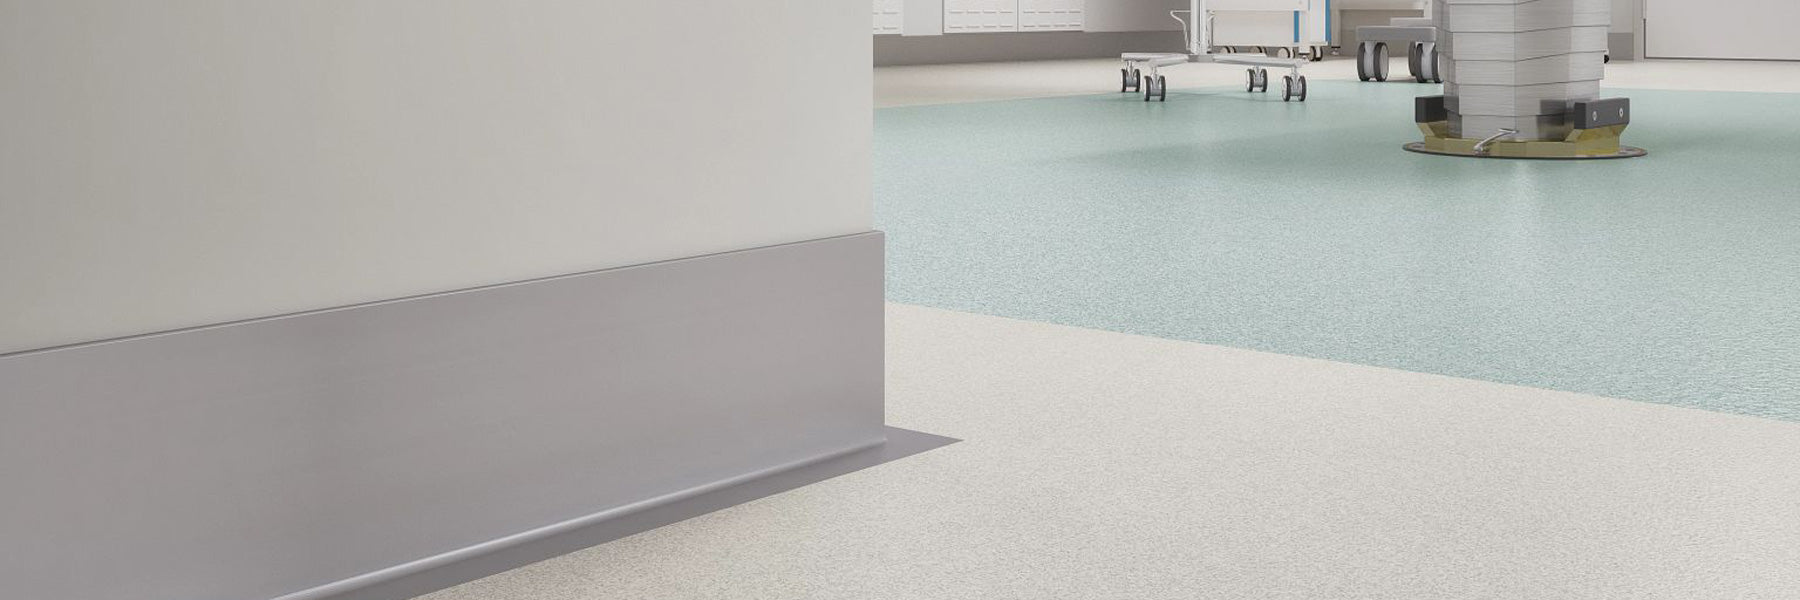 Commercial Flooring Wall Base